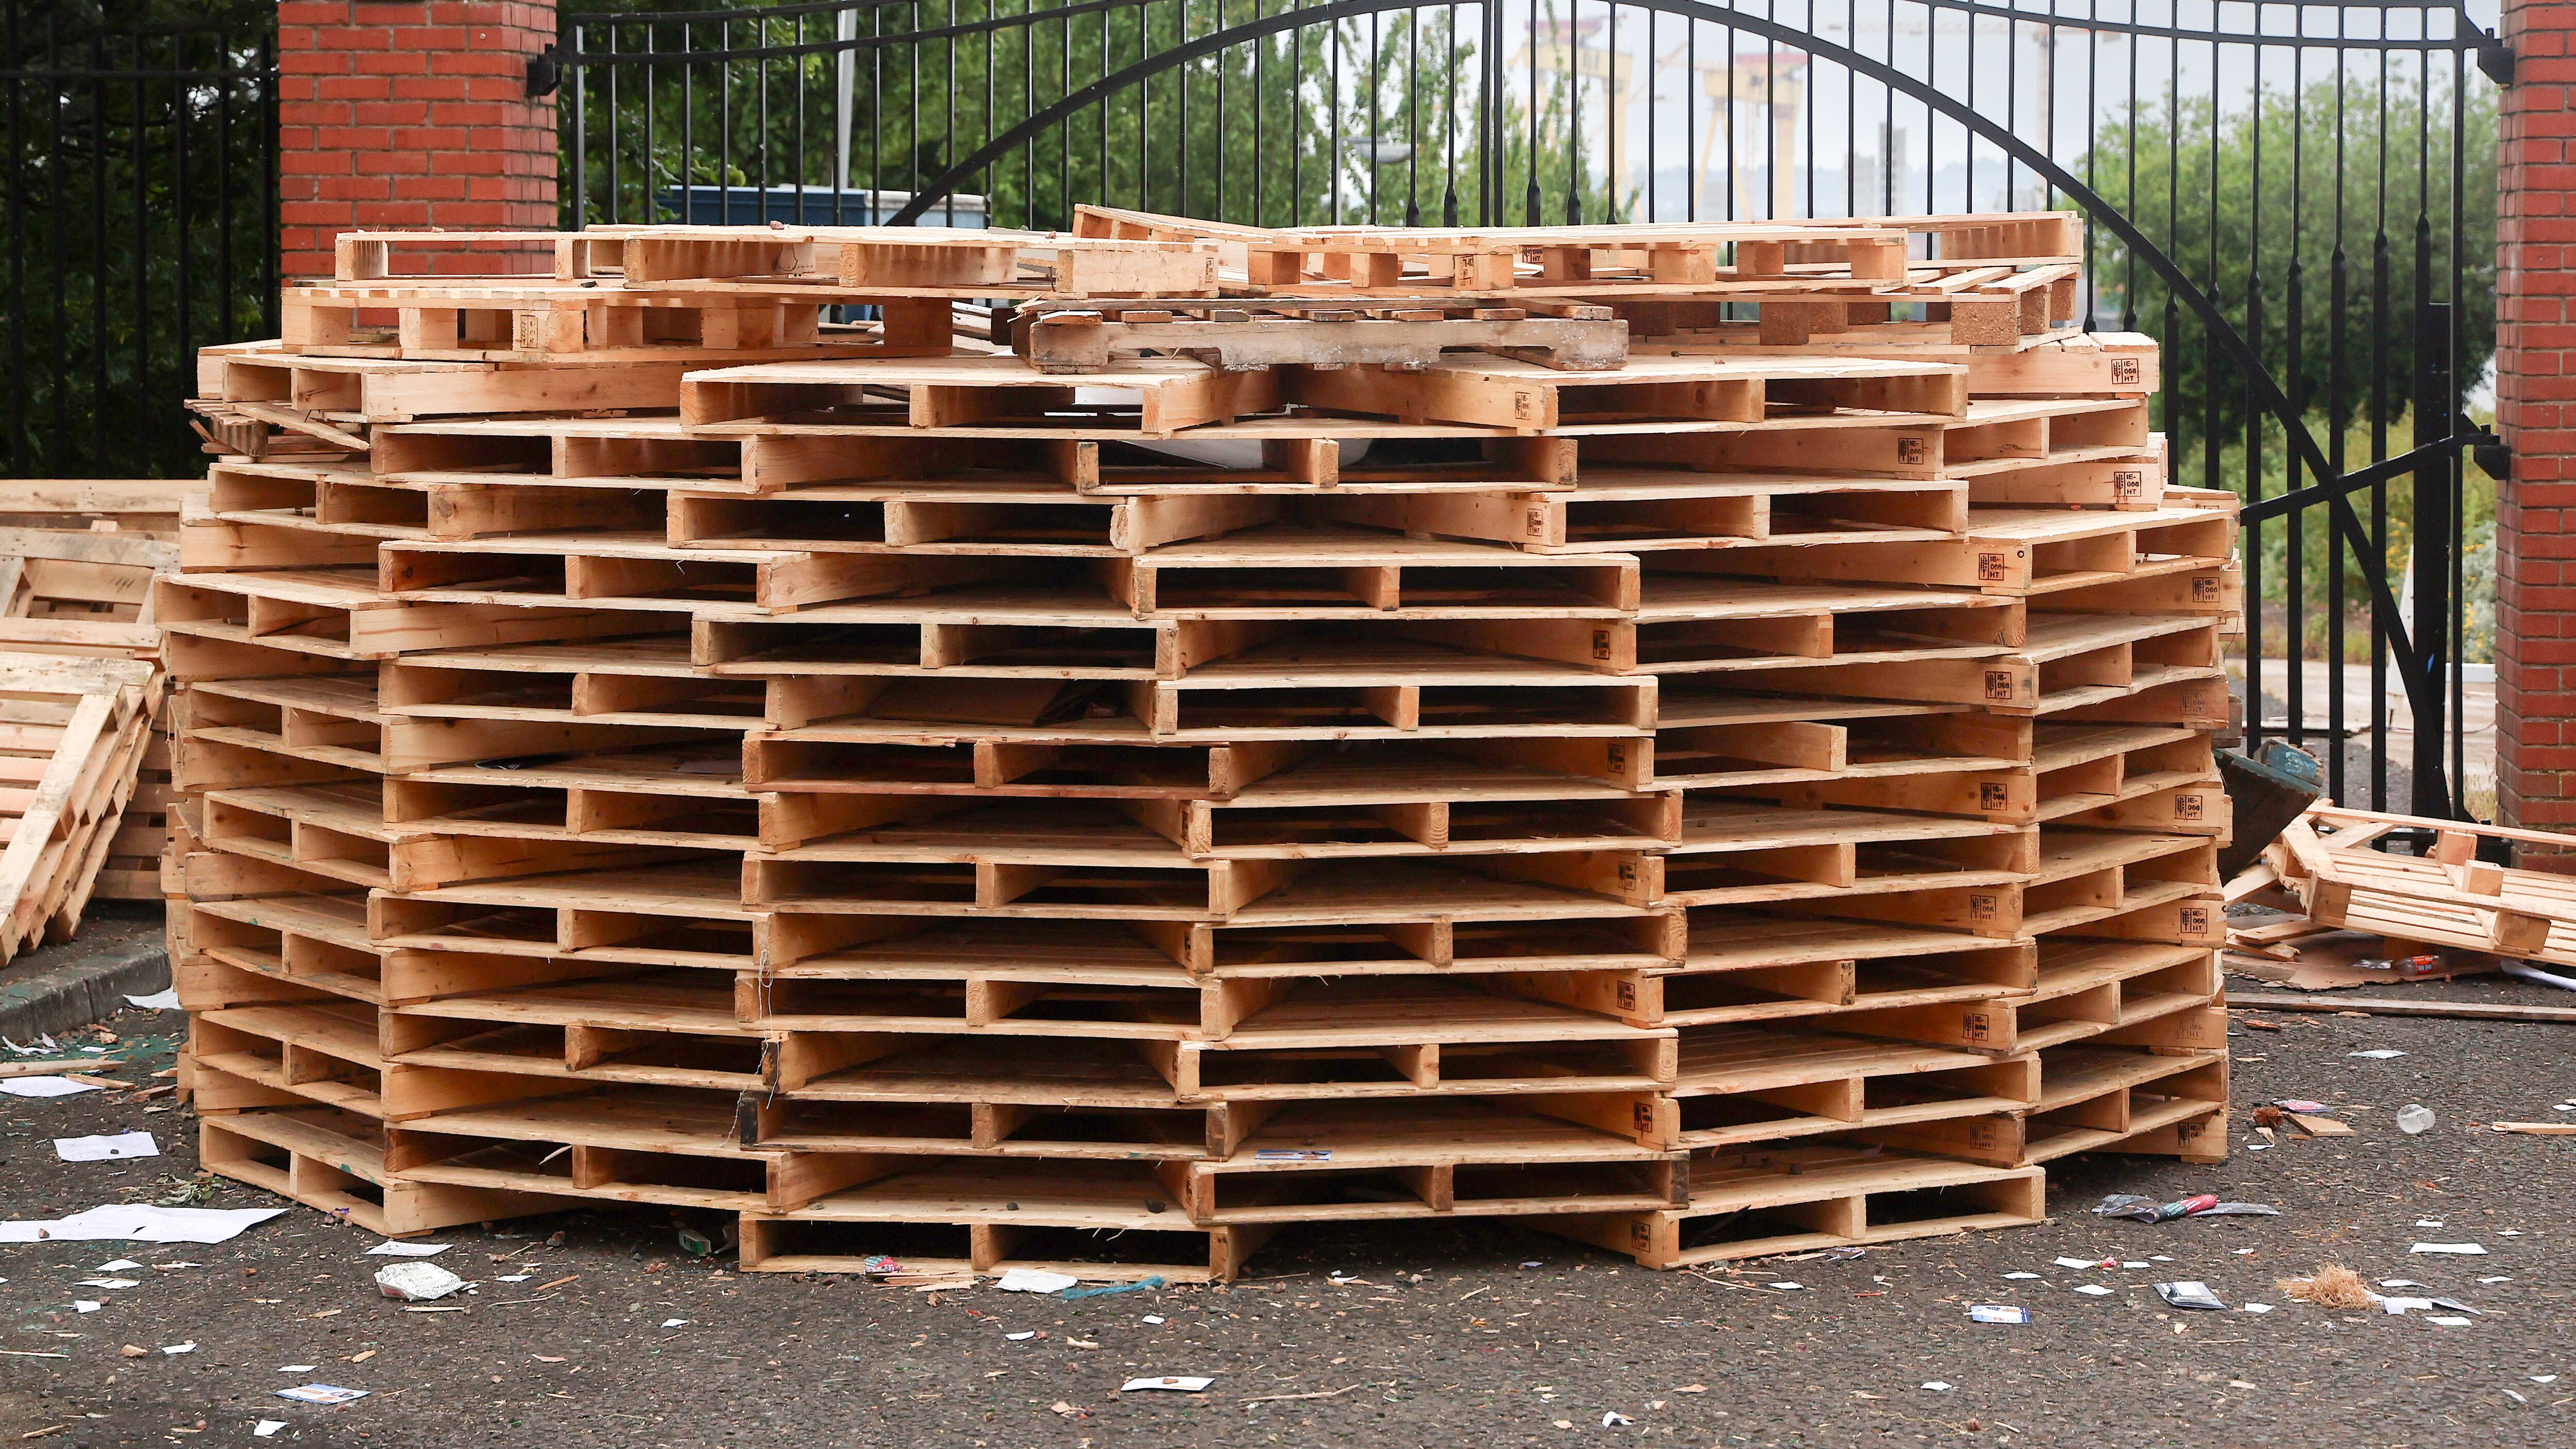 Pallets gathered for a bonfire on Edlingham Street near the Duncairn interface in North Belfast. NO BYLINE